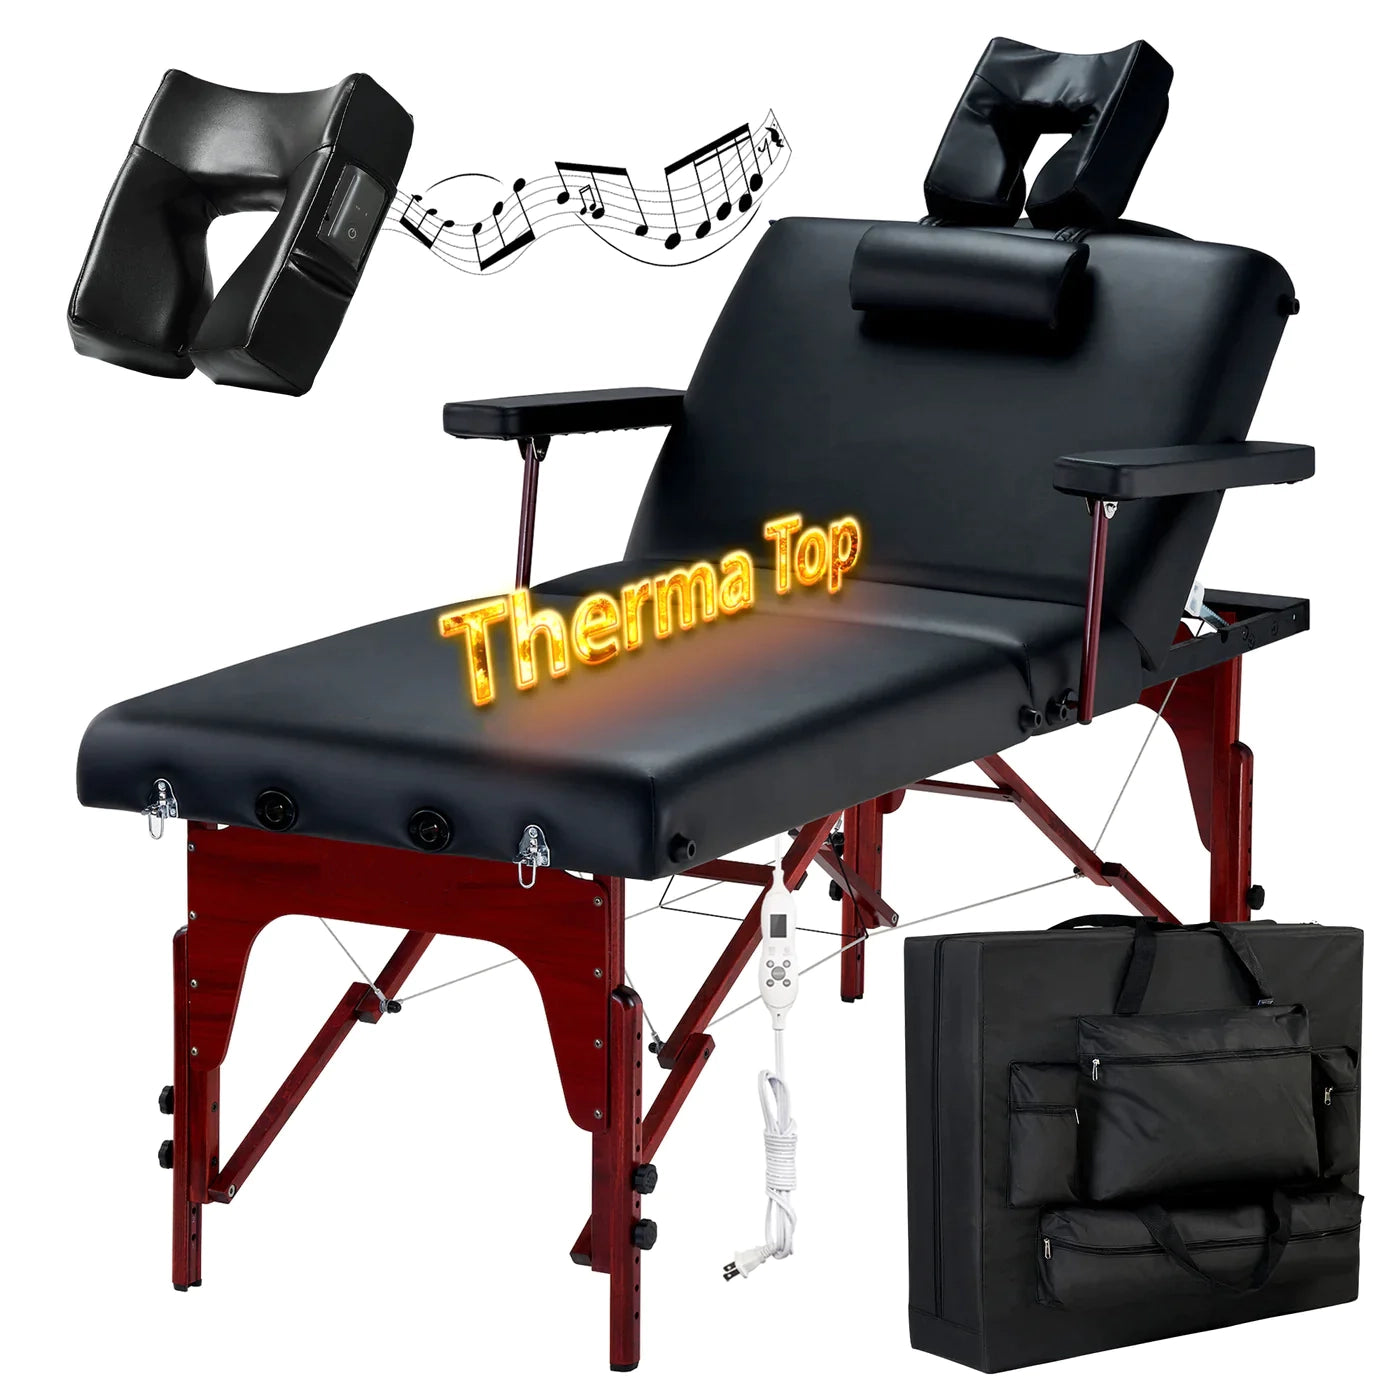 Spabodega 31" Montclair™ Salon Therma-Top® - Ultimate Massage Table and Package, Has All the Bells & Whistles! (Black Color)